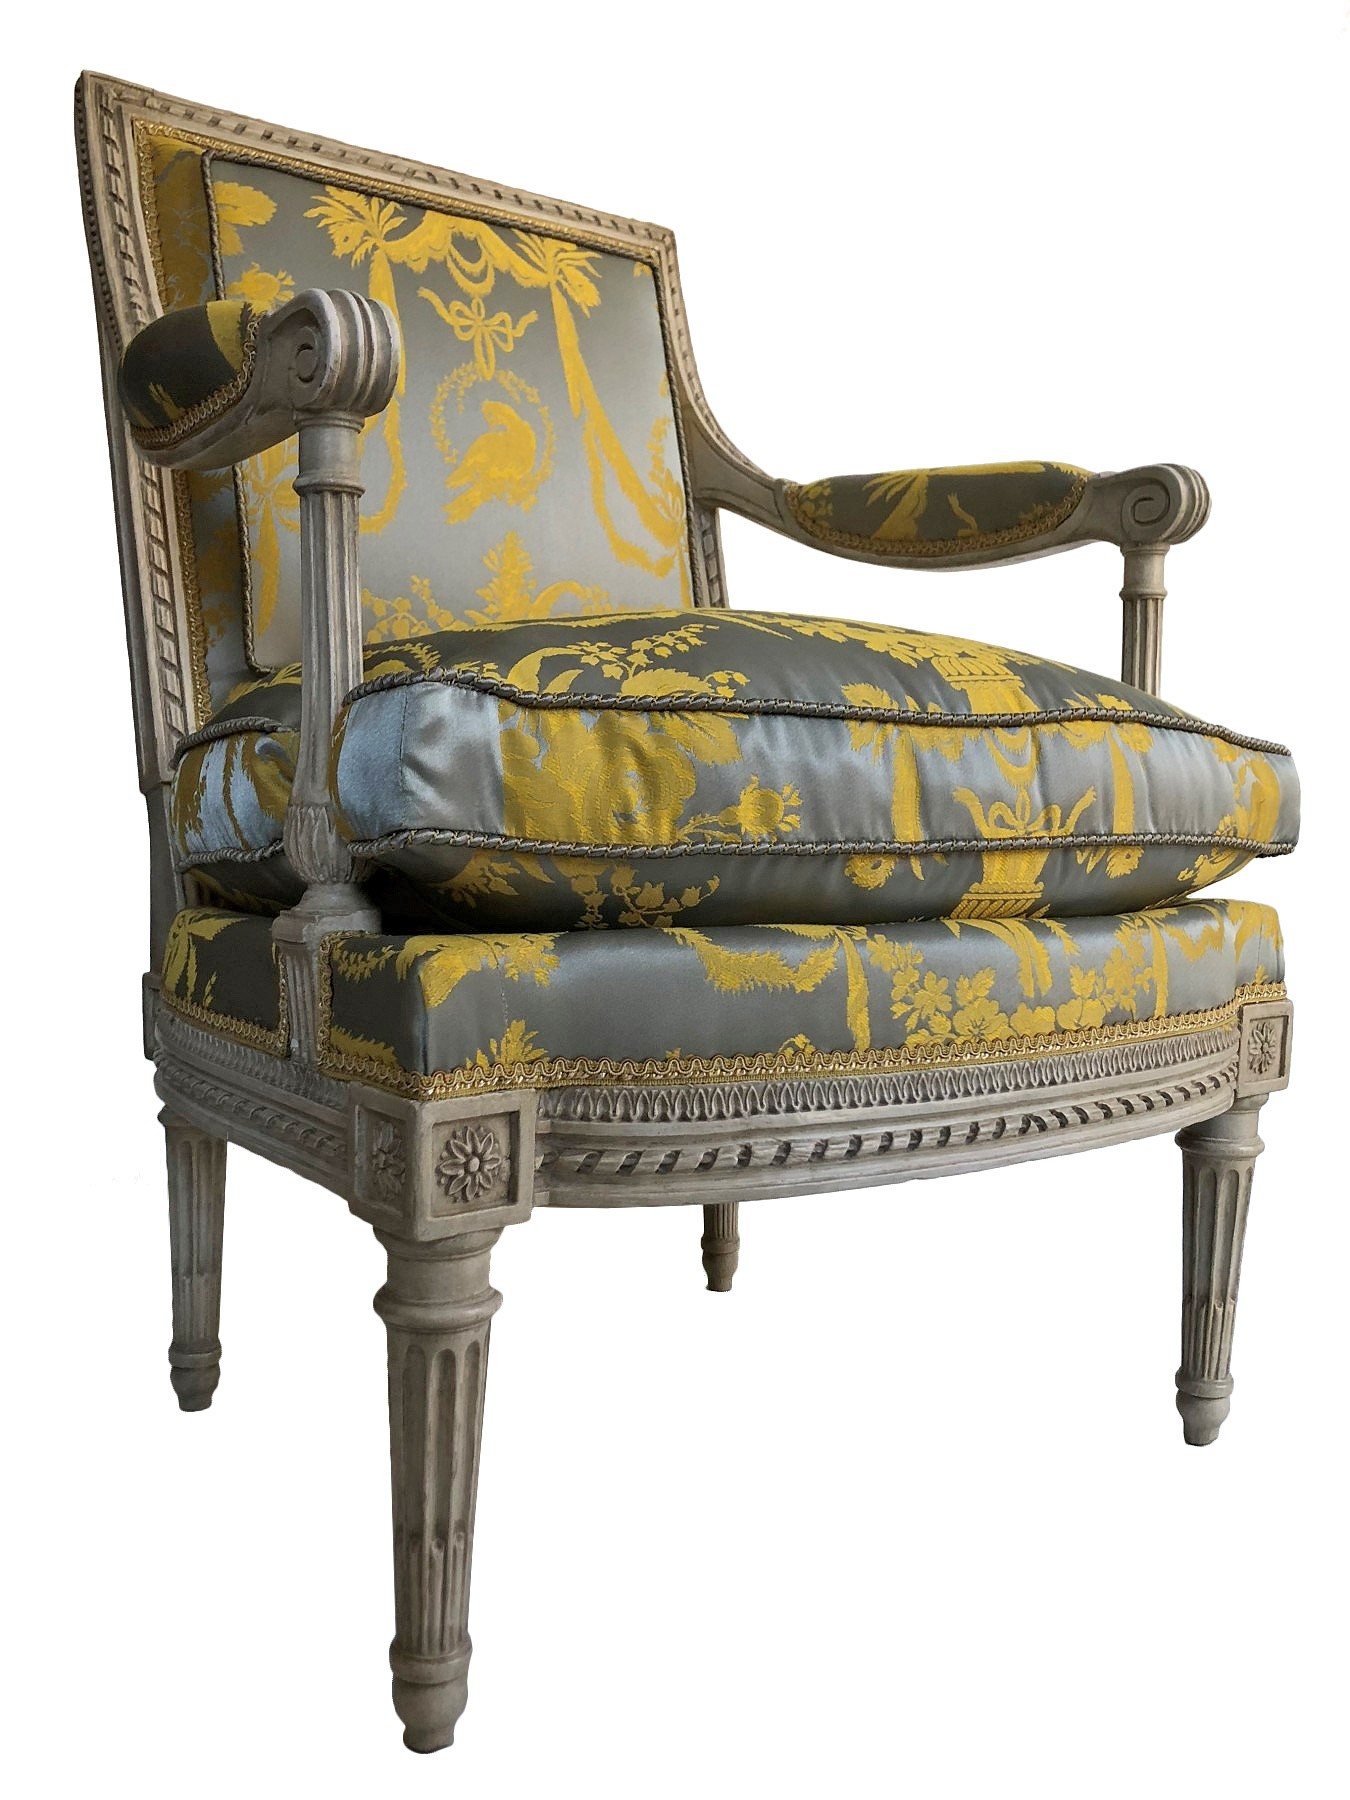 A Louis Xvi Armchair From The Tuileries Palace Ref 76705